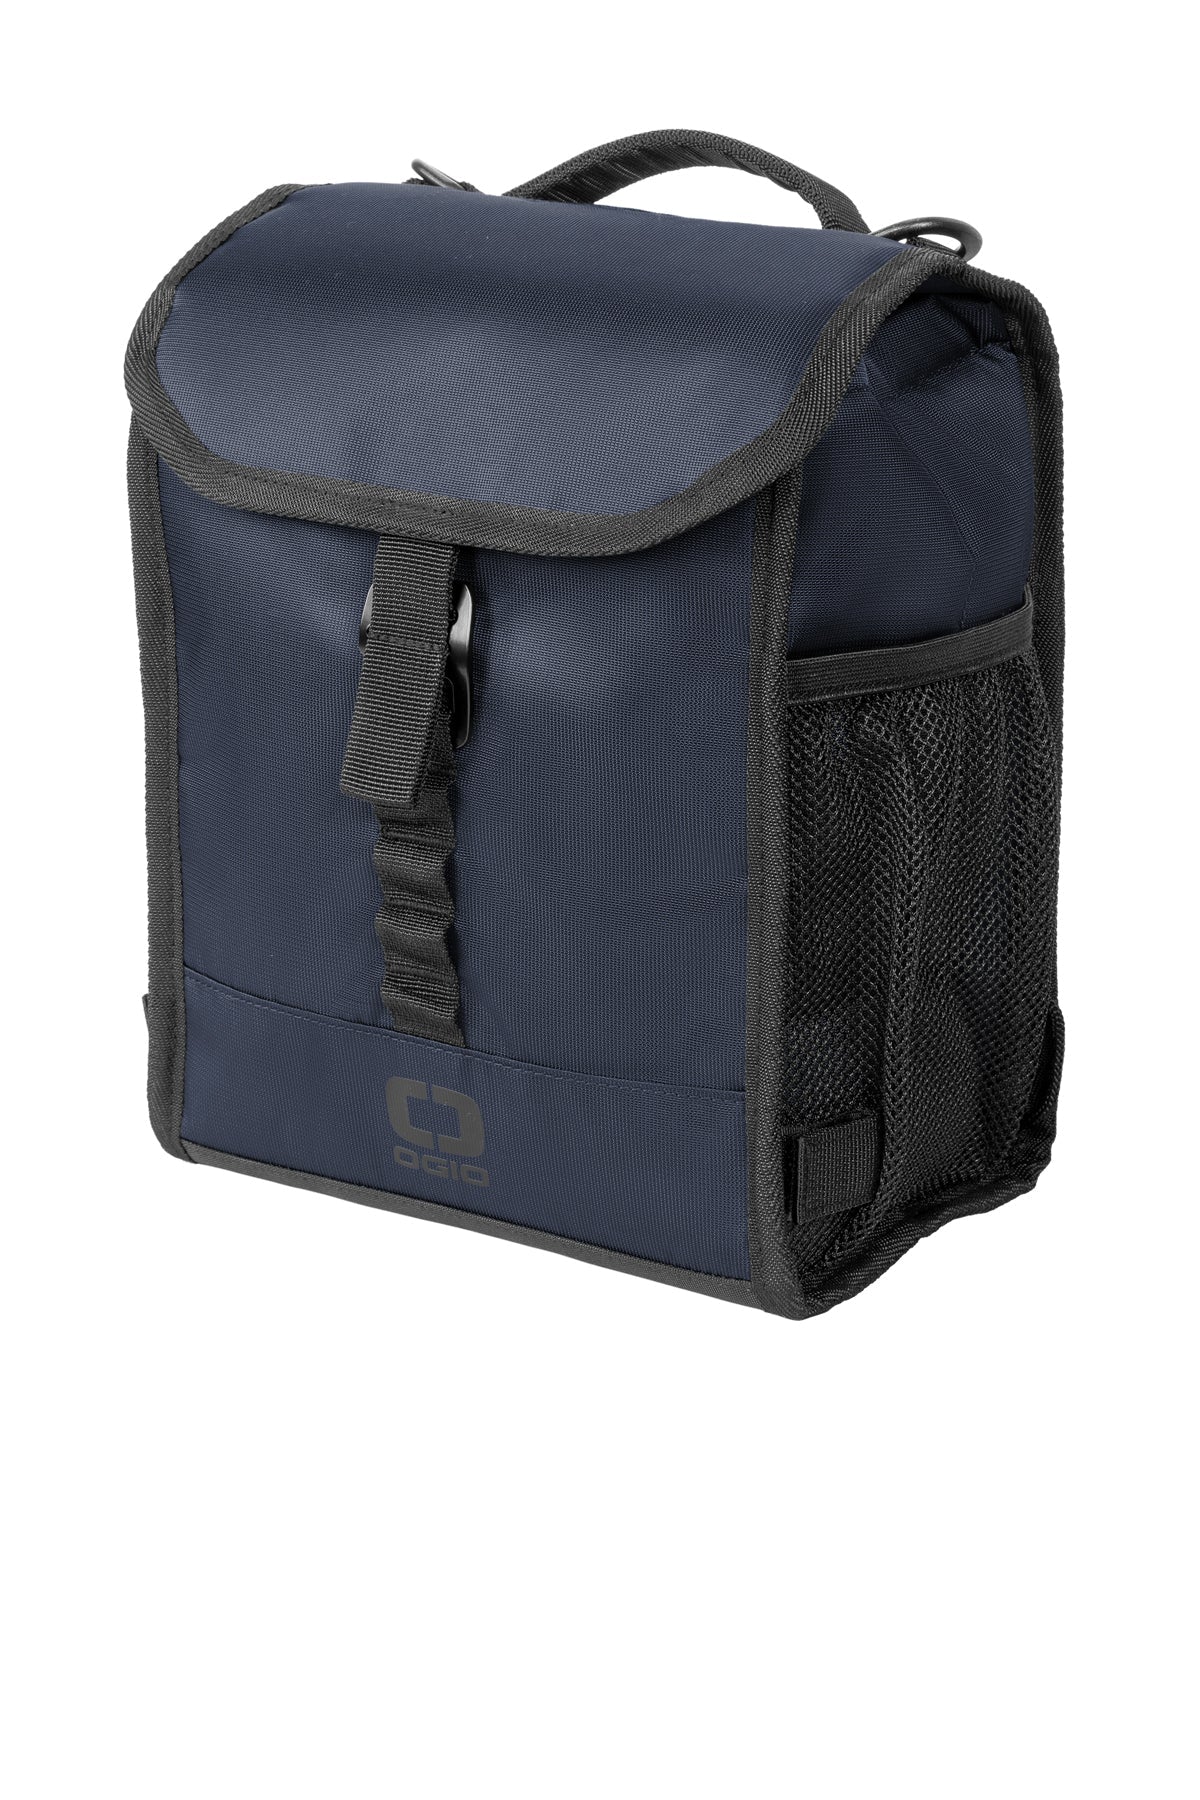 OGIO Sprint Custom Lunch Coolers, River Blue Navy